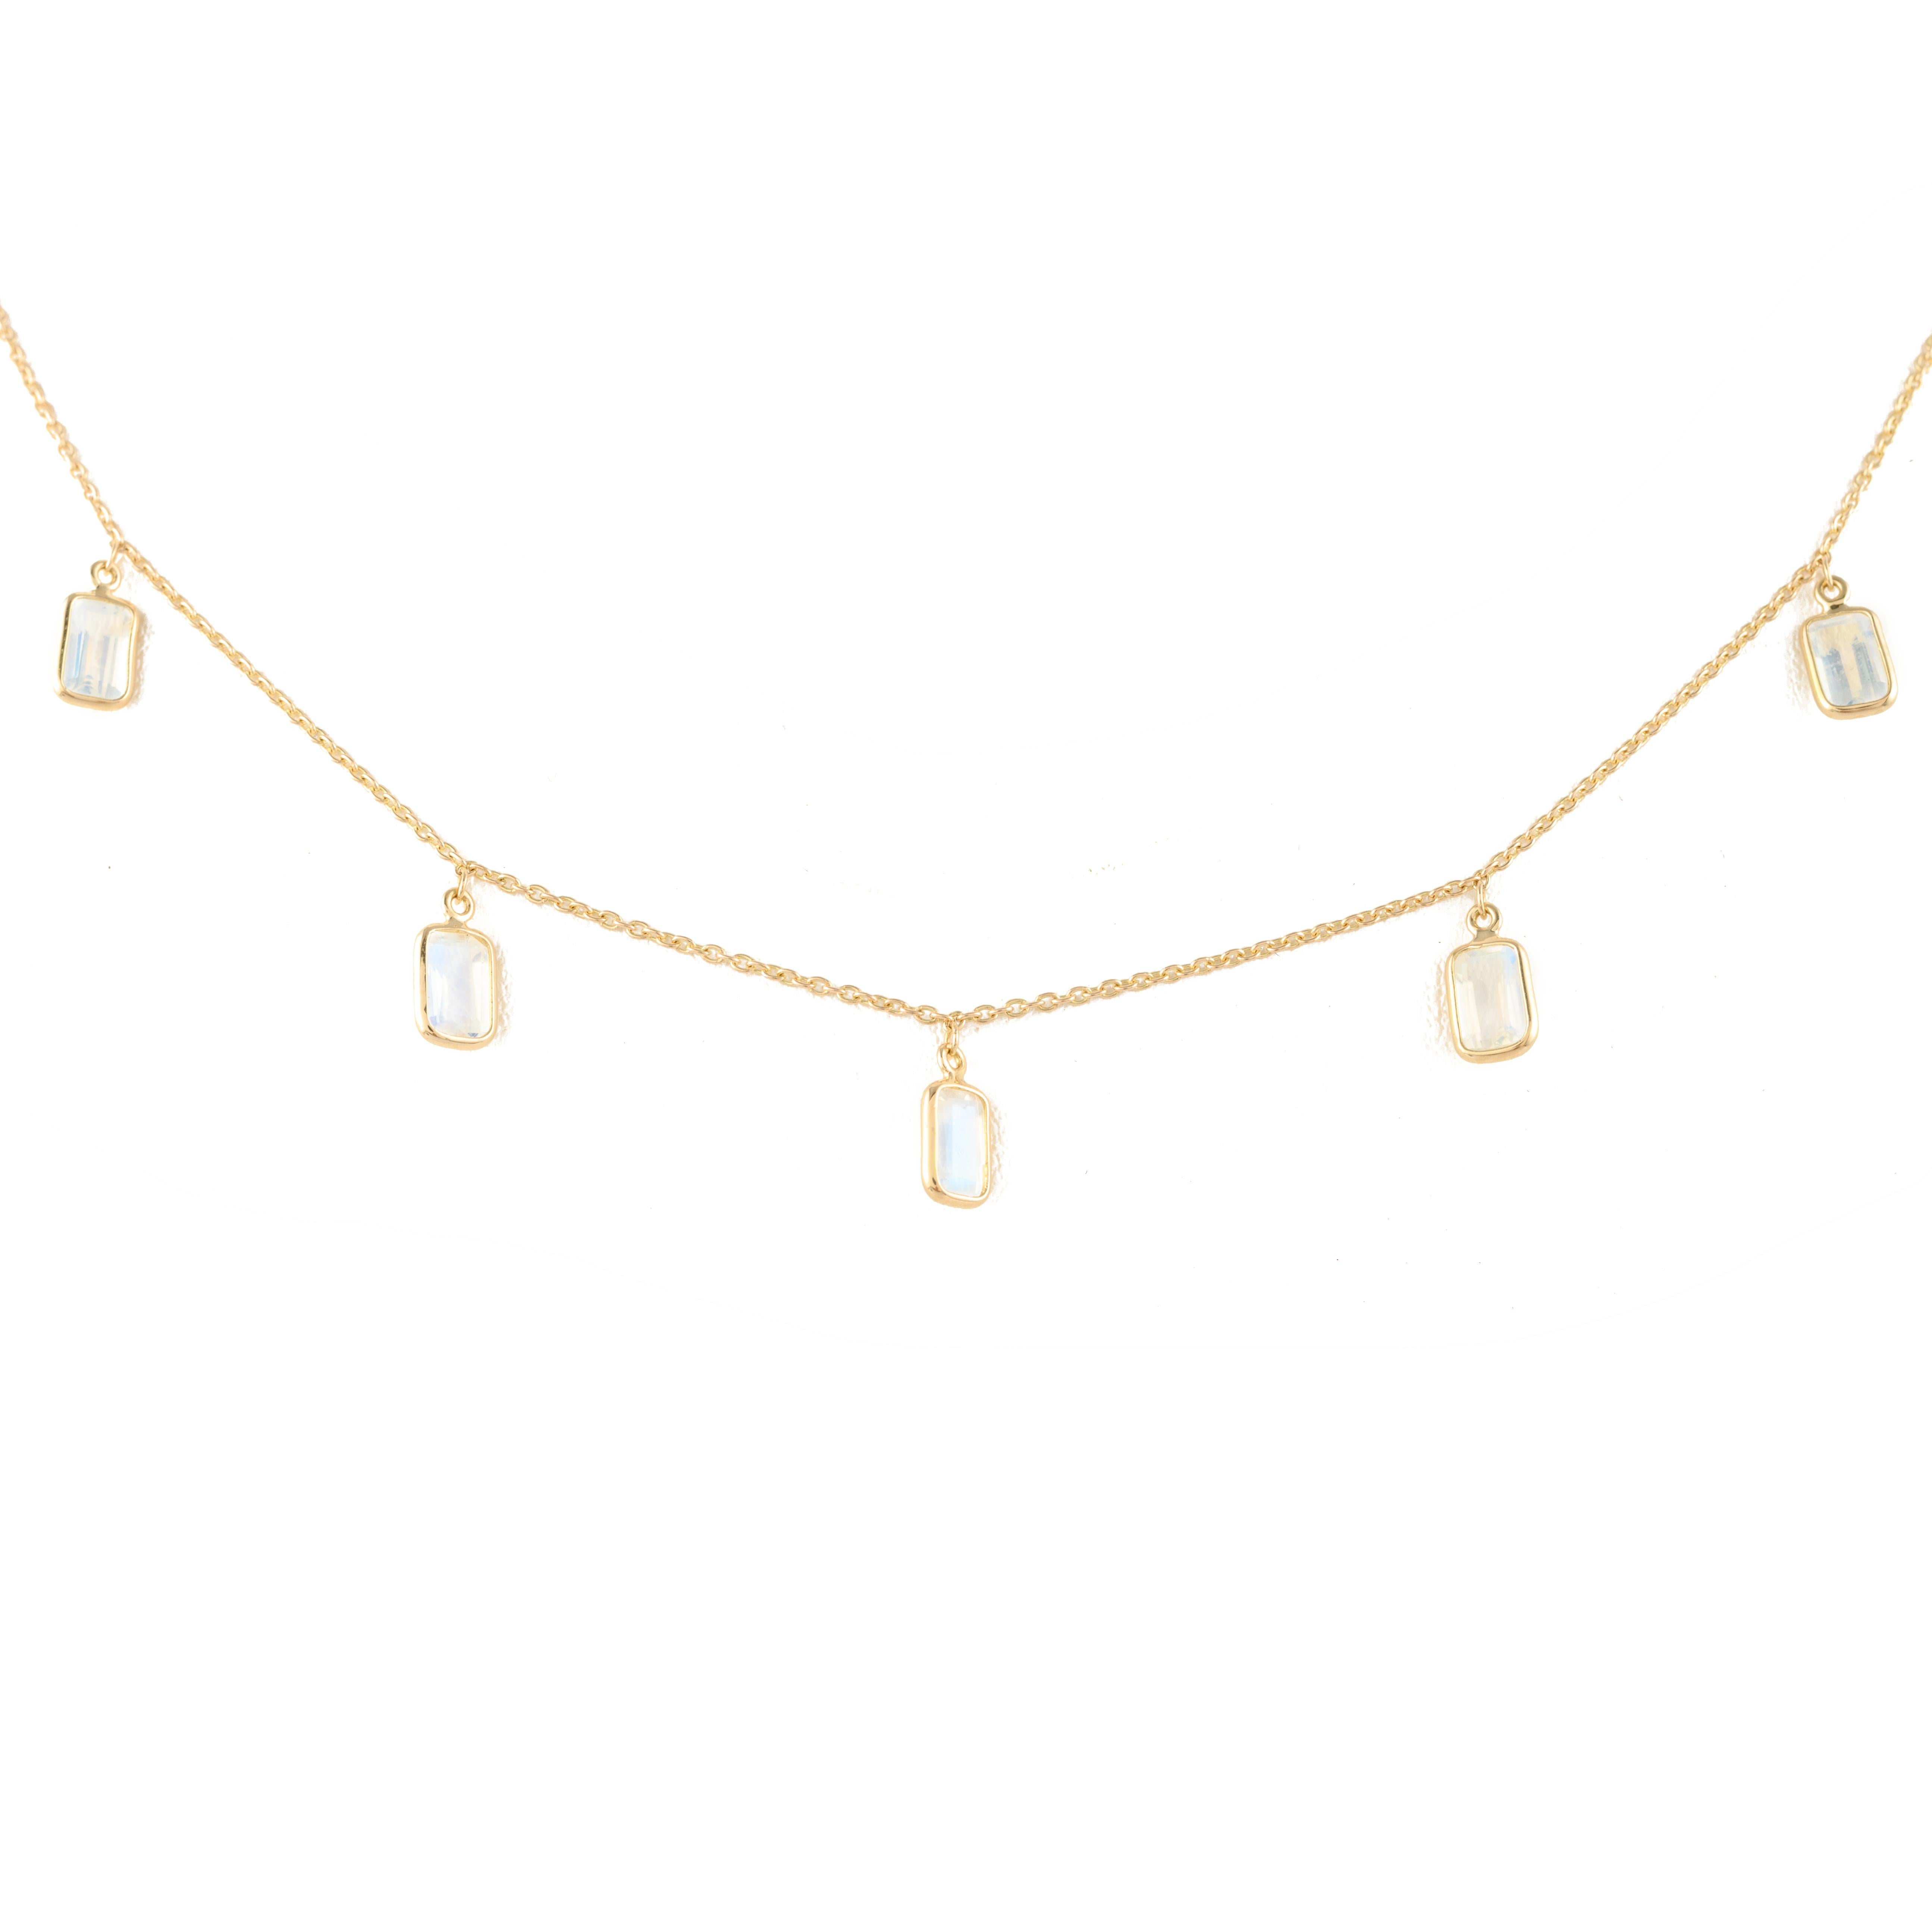 Rainbow Moonstone Chain Necklace Gift for Girlfriend studded with rainbow moonstone in 18K Gold. This stunning piece of jewelry instantly elevates a casual look or dressy outfit. 
Moonstone can help you attract the right people into your